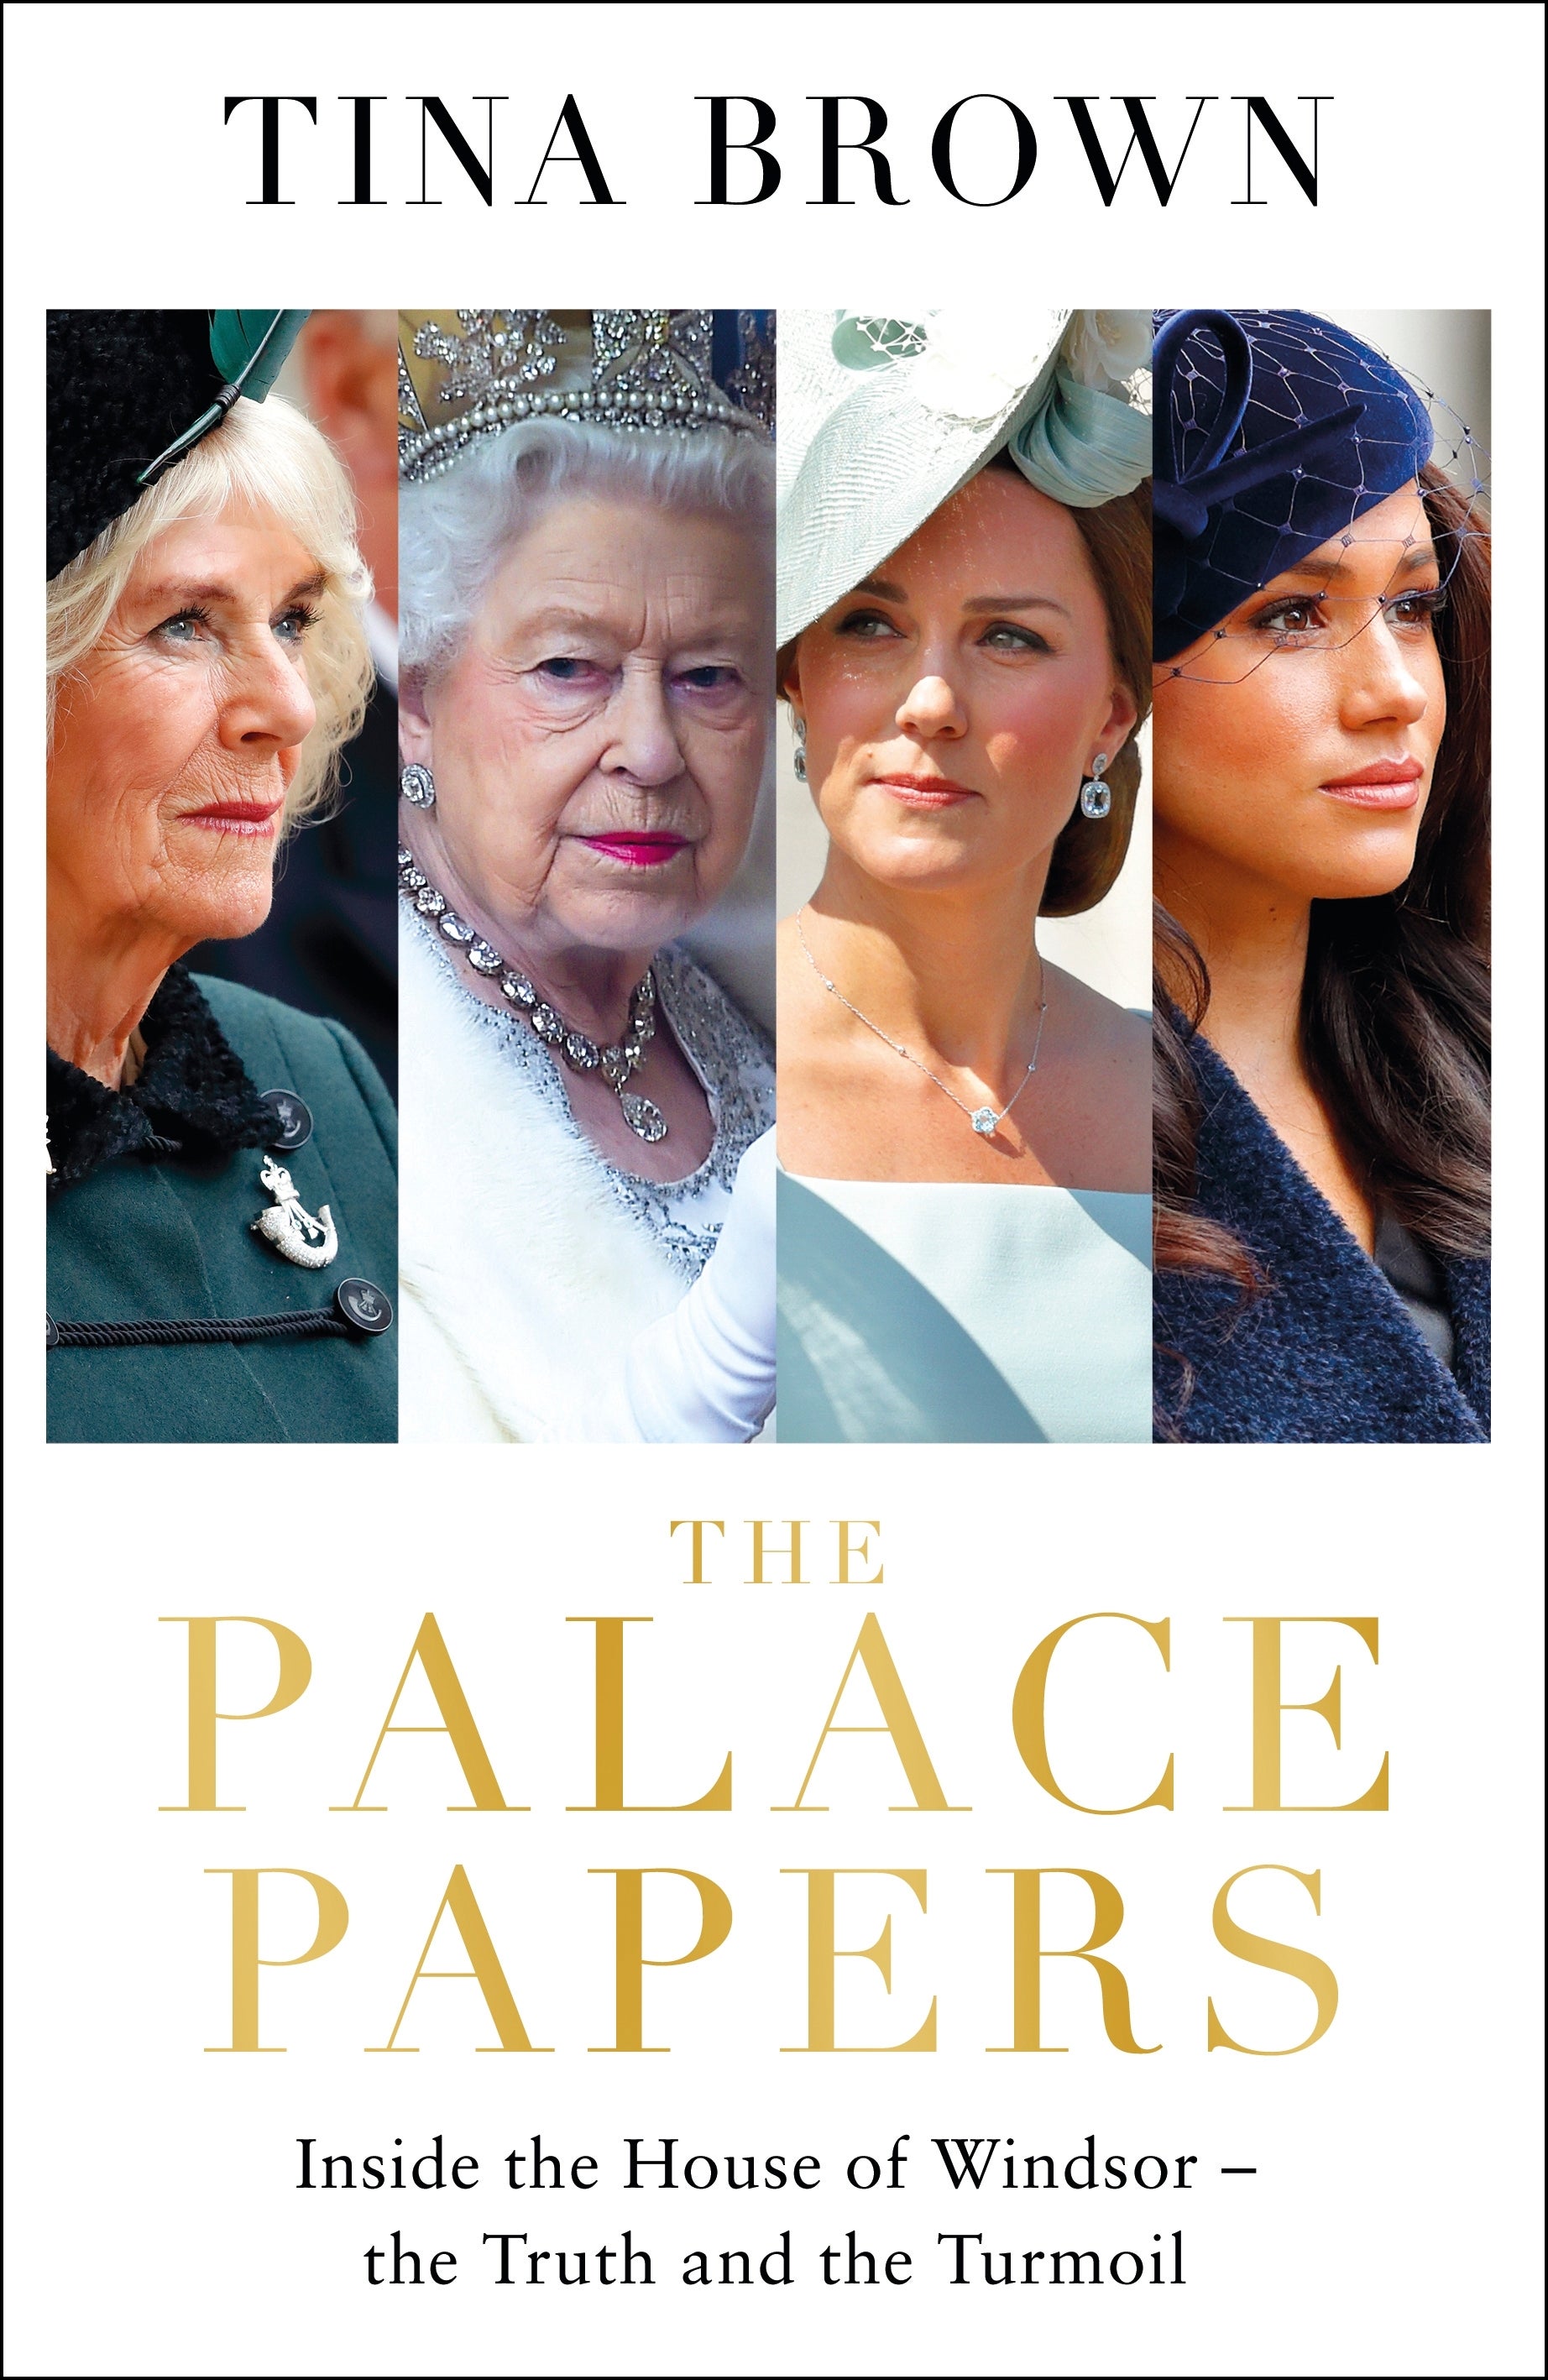 The Palace Papers: Inside the House of Windsor by Tina Brown